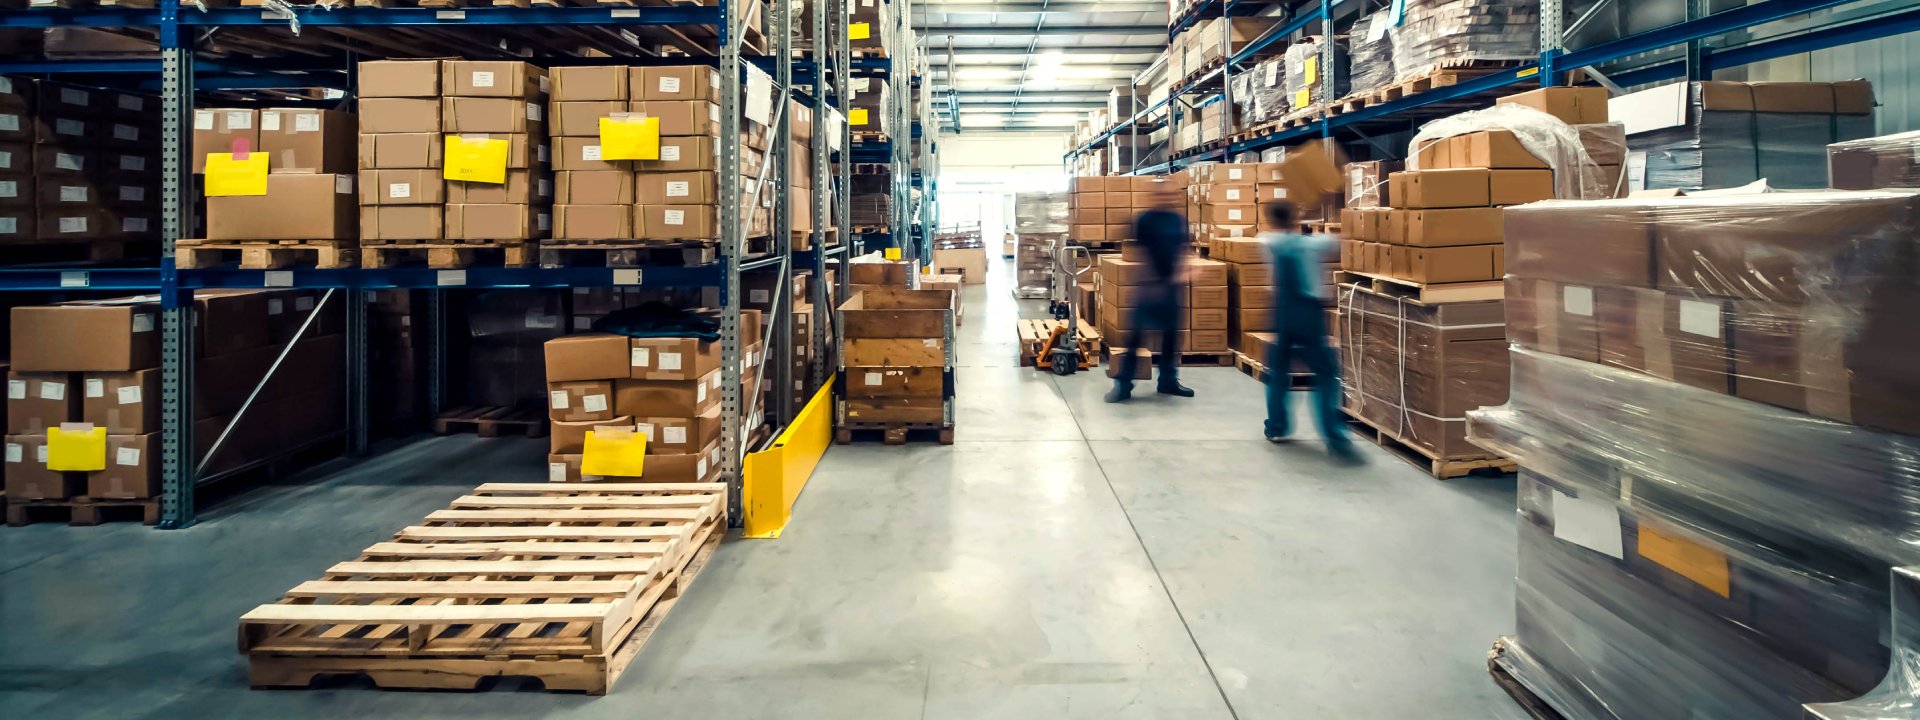 New Research: Attracting and retaining the right people is top concern for continued warehouse productivity